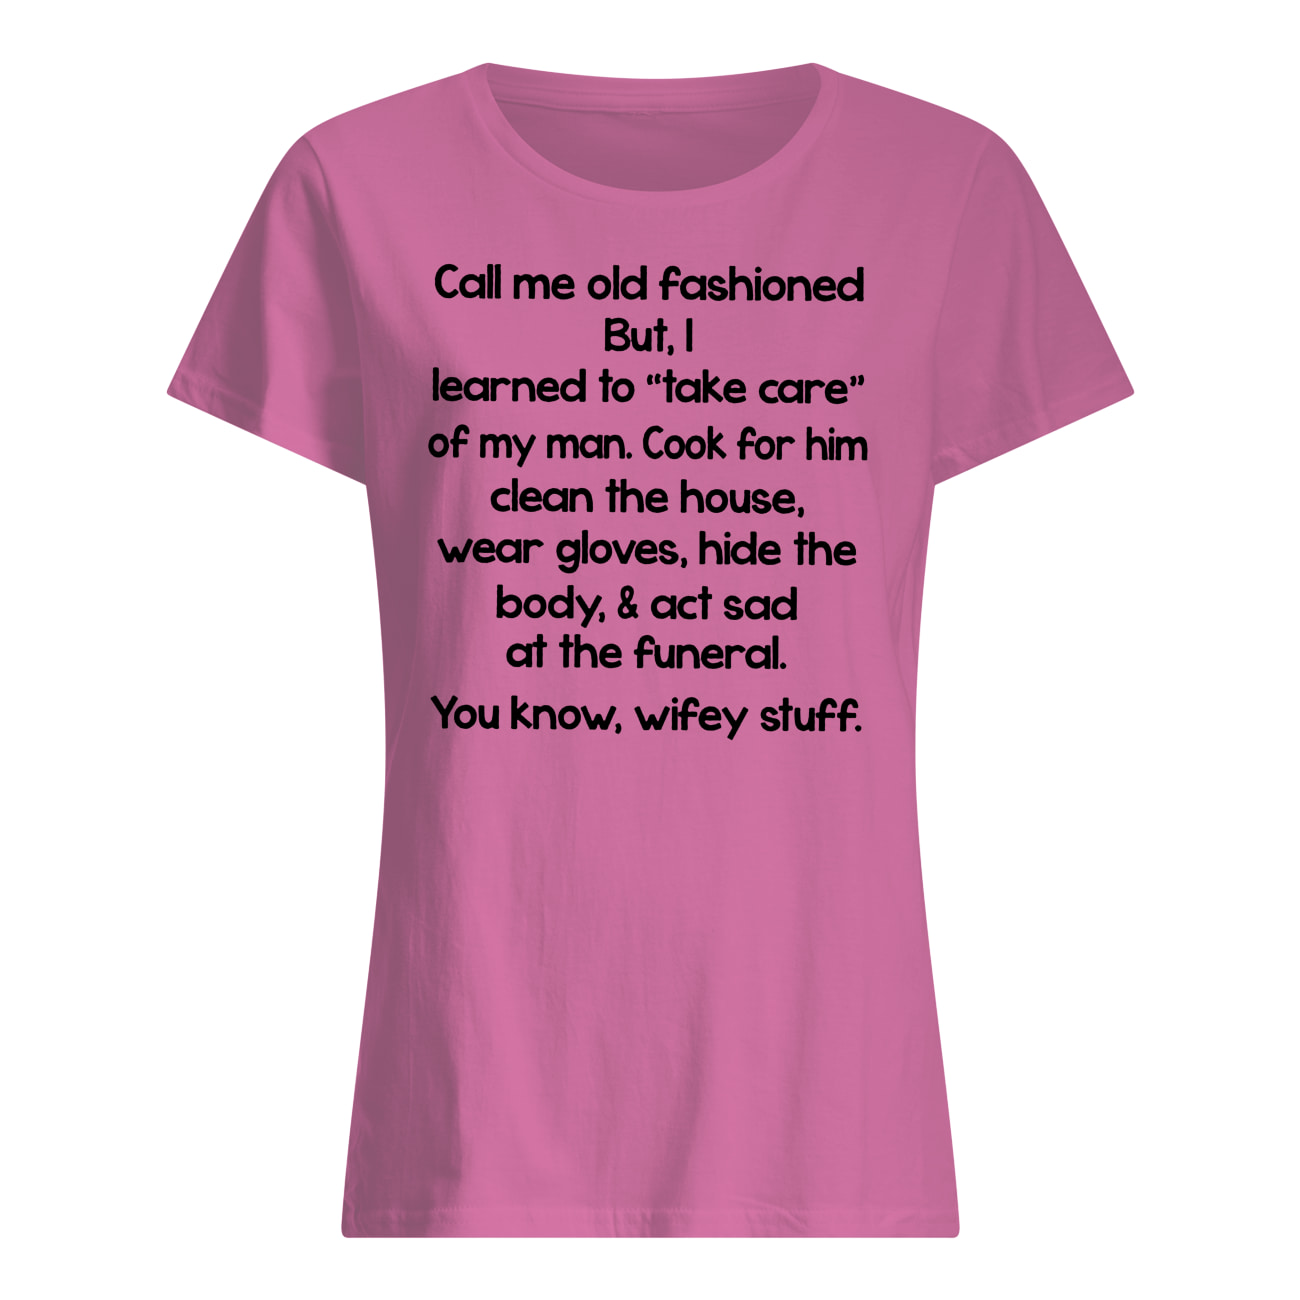 Call me old fashioned but I learned to take care of my man womens shirt